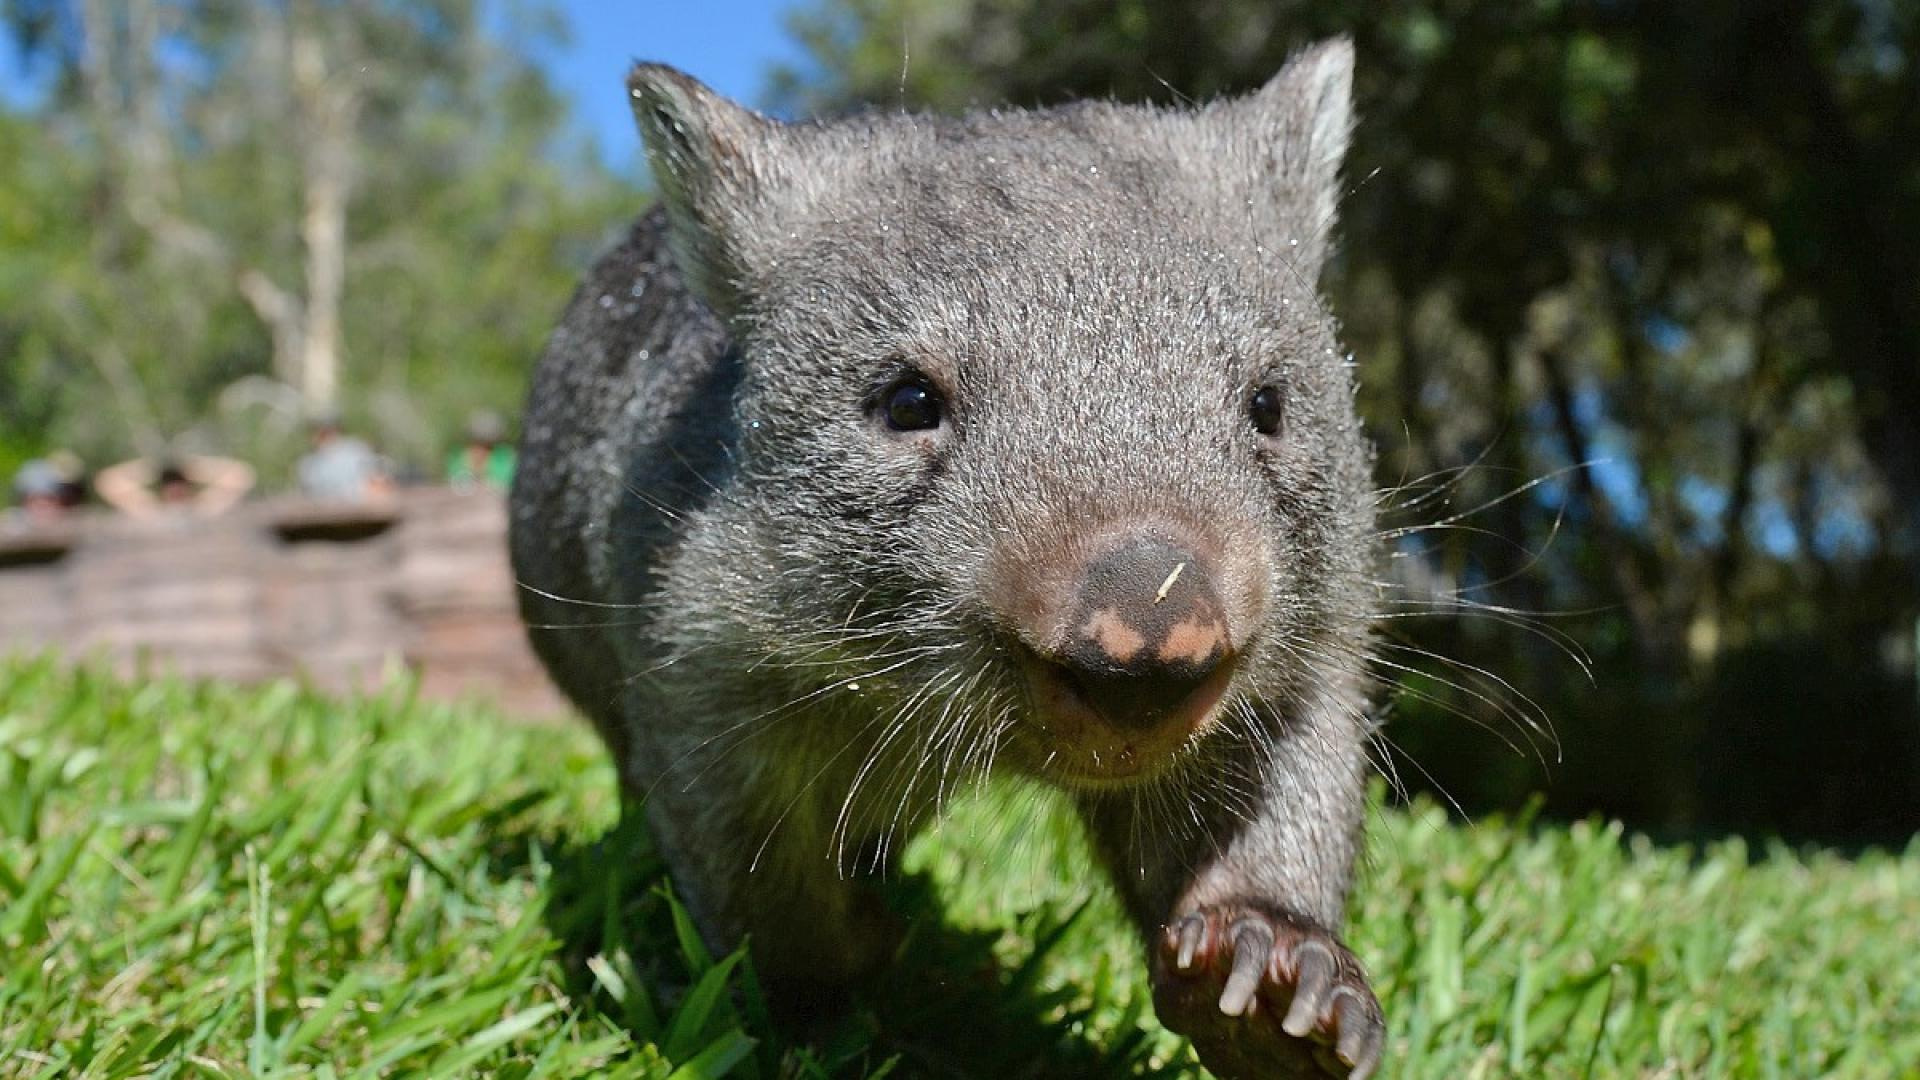 Incoterms and Wombats | ATO Shipping